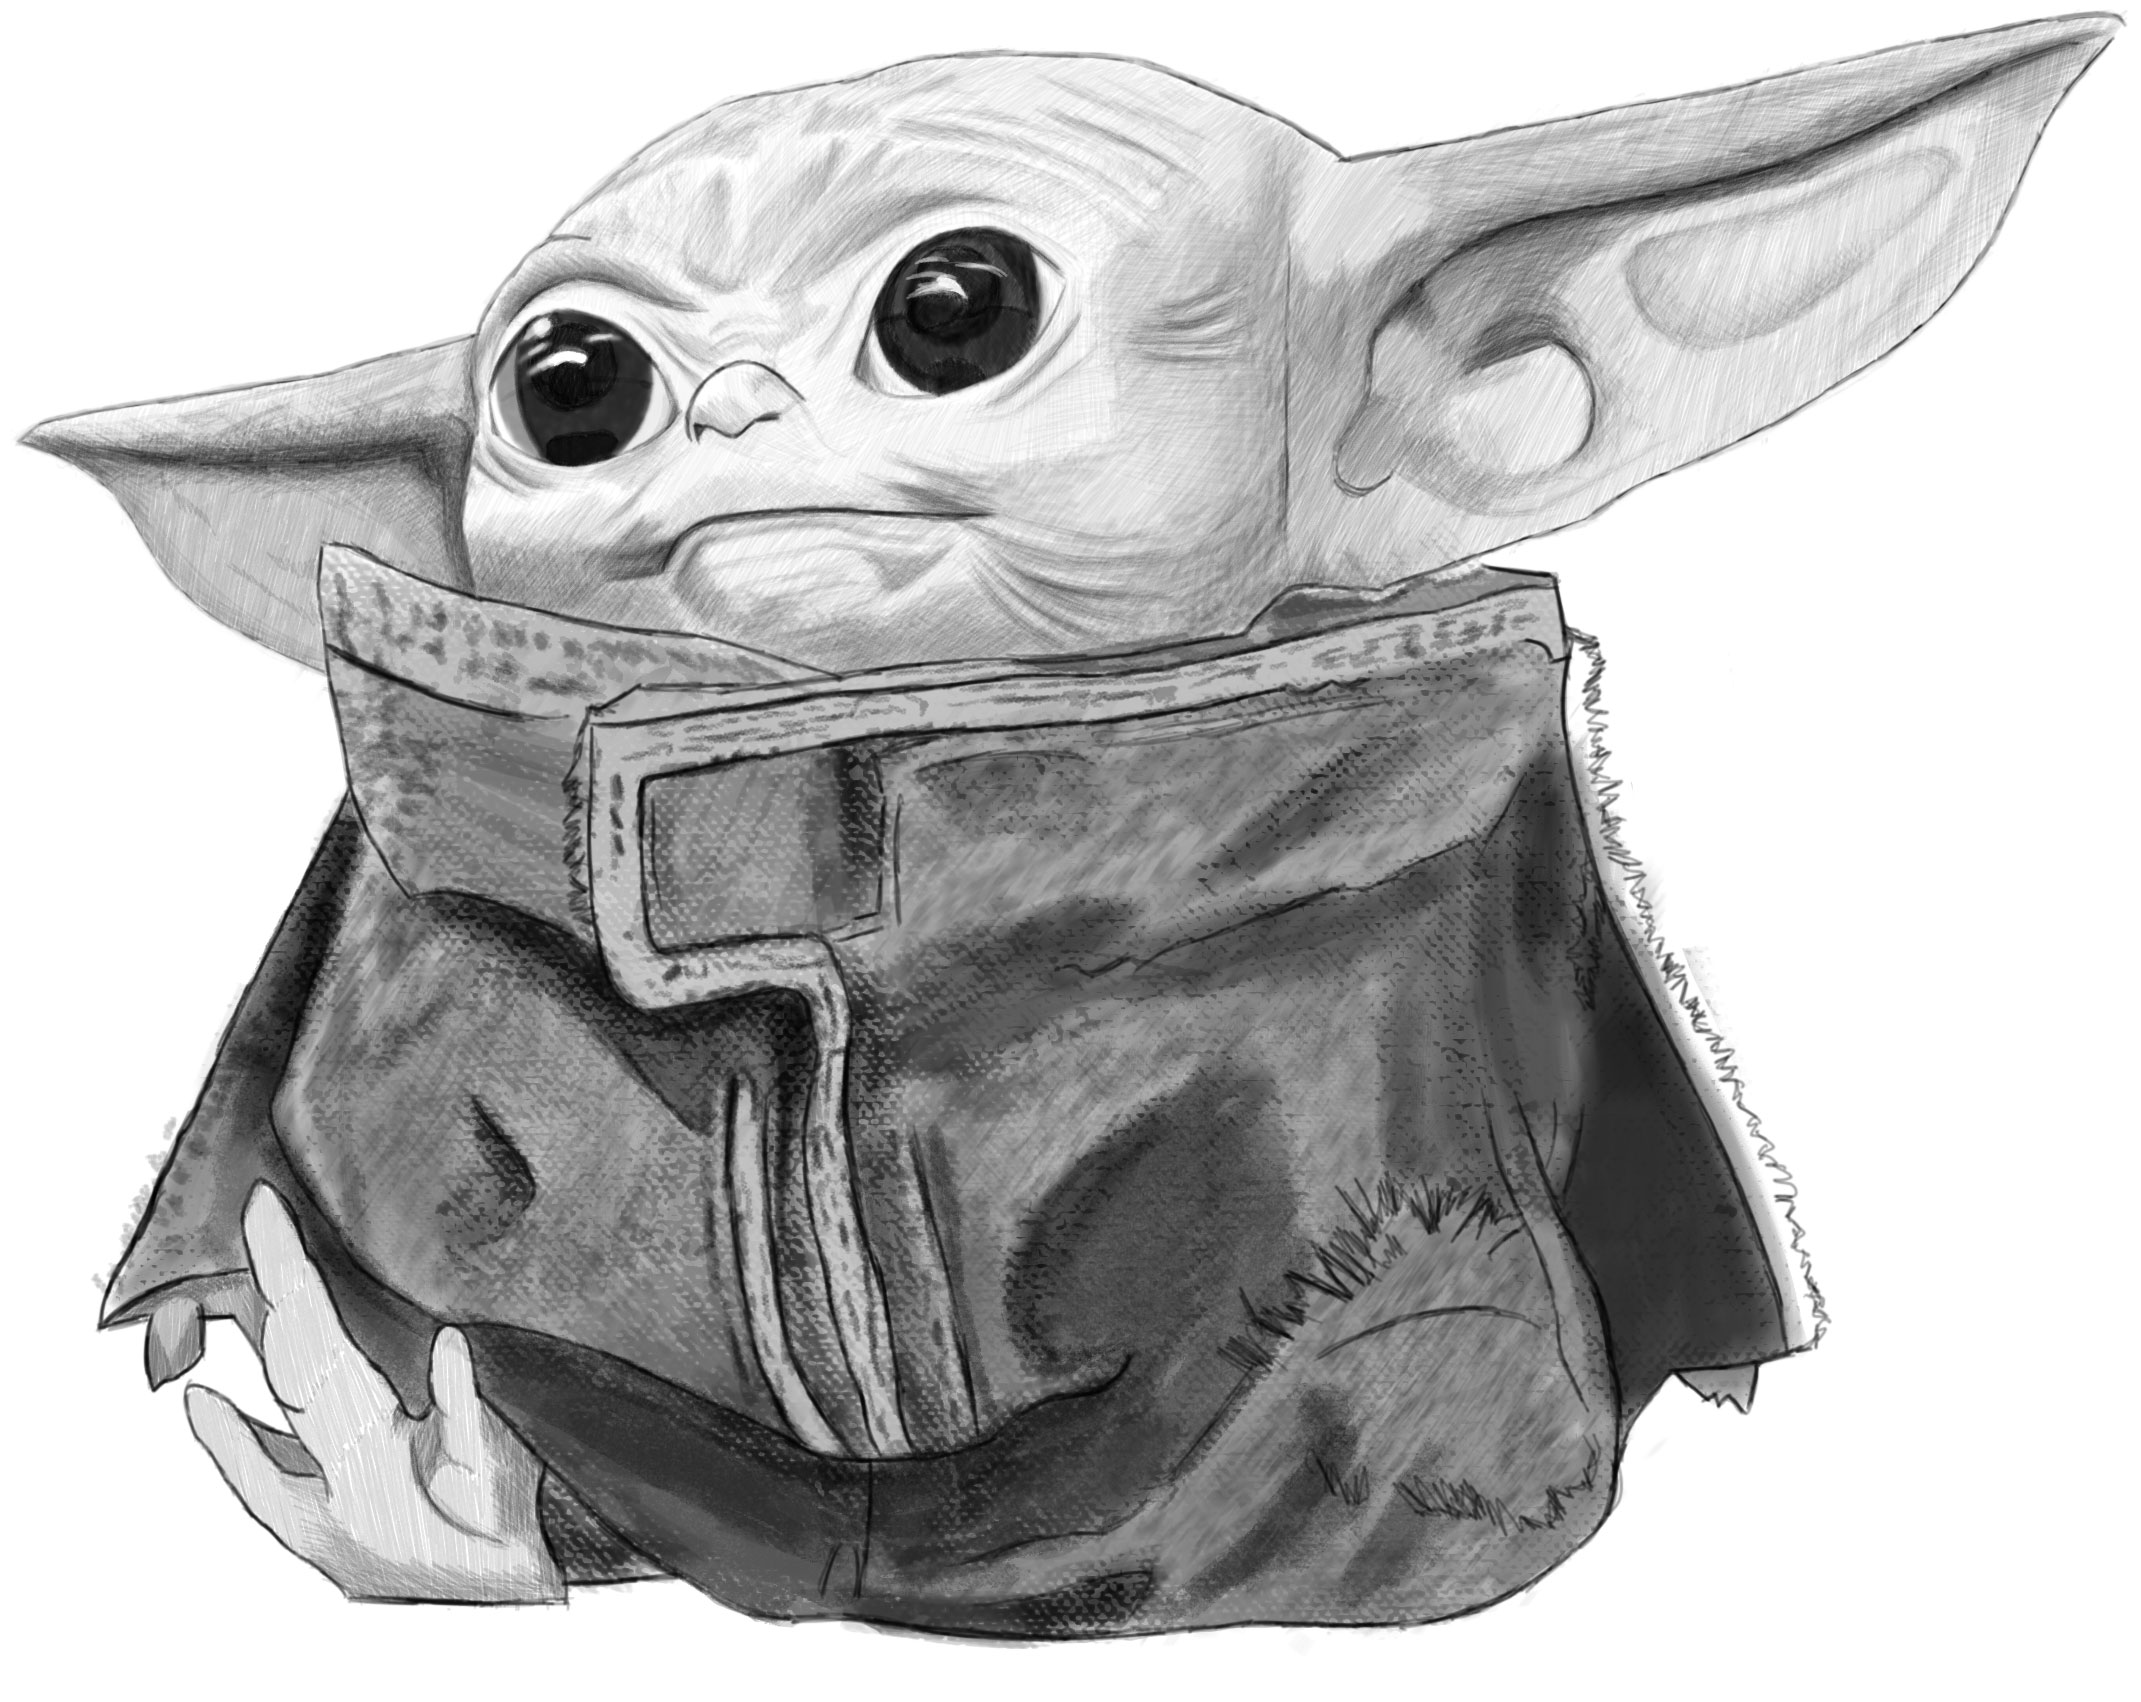 How to Draw Baby Yoda from The Mandalorian (Realistic) - Easy Step by